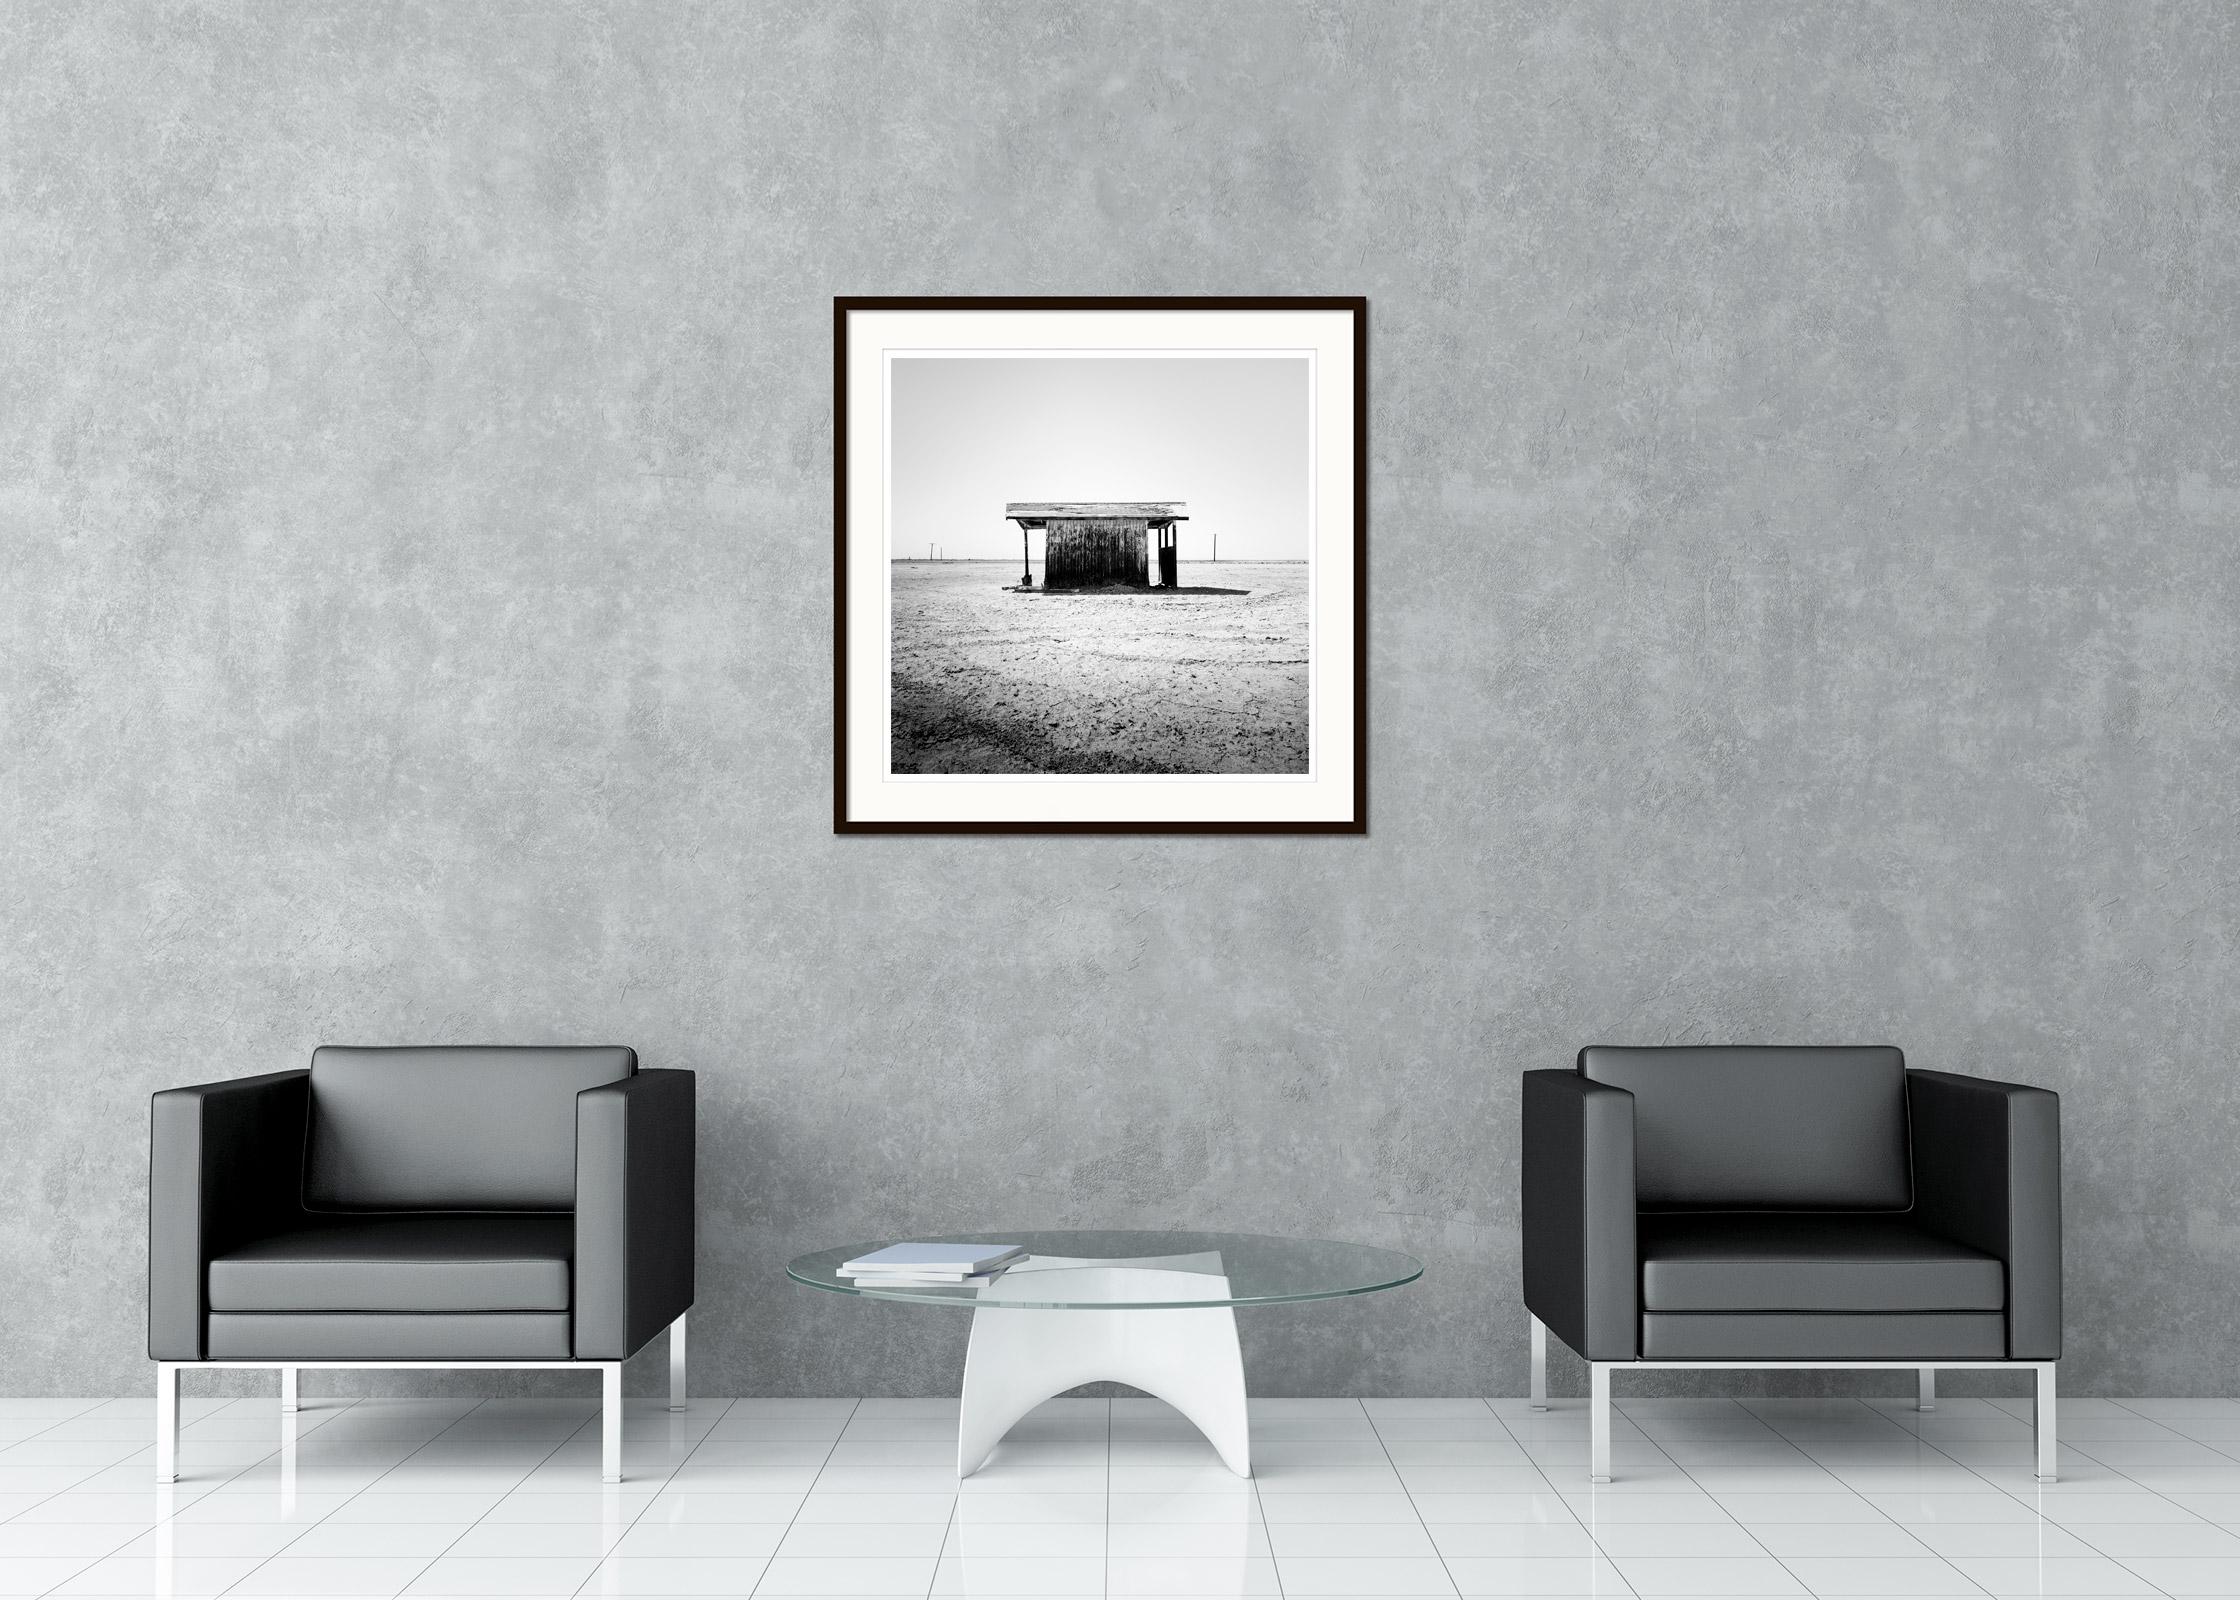 Black and White Fine Art minimalist photography - Abandoned bathhouse at the Salton sea, California, USA. Archival pigment ink print, edition of 9. Signed, titled, dated and numbered by artist. Certificate of authenticity included. Printed with 4cm